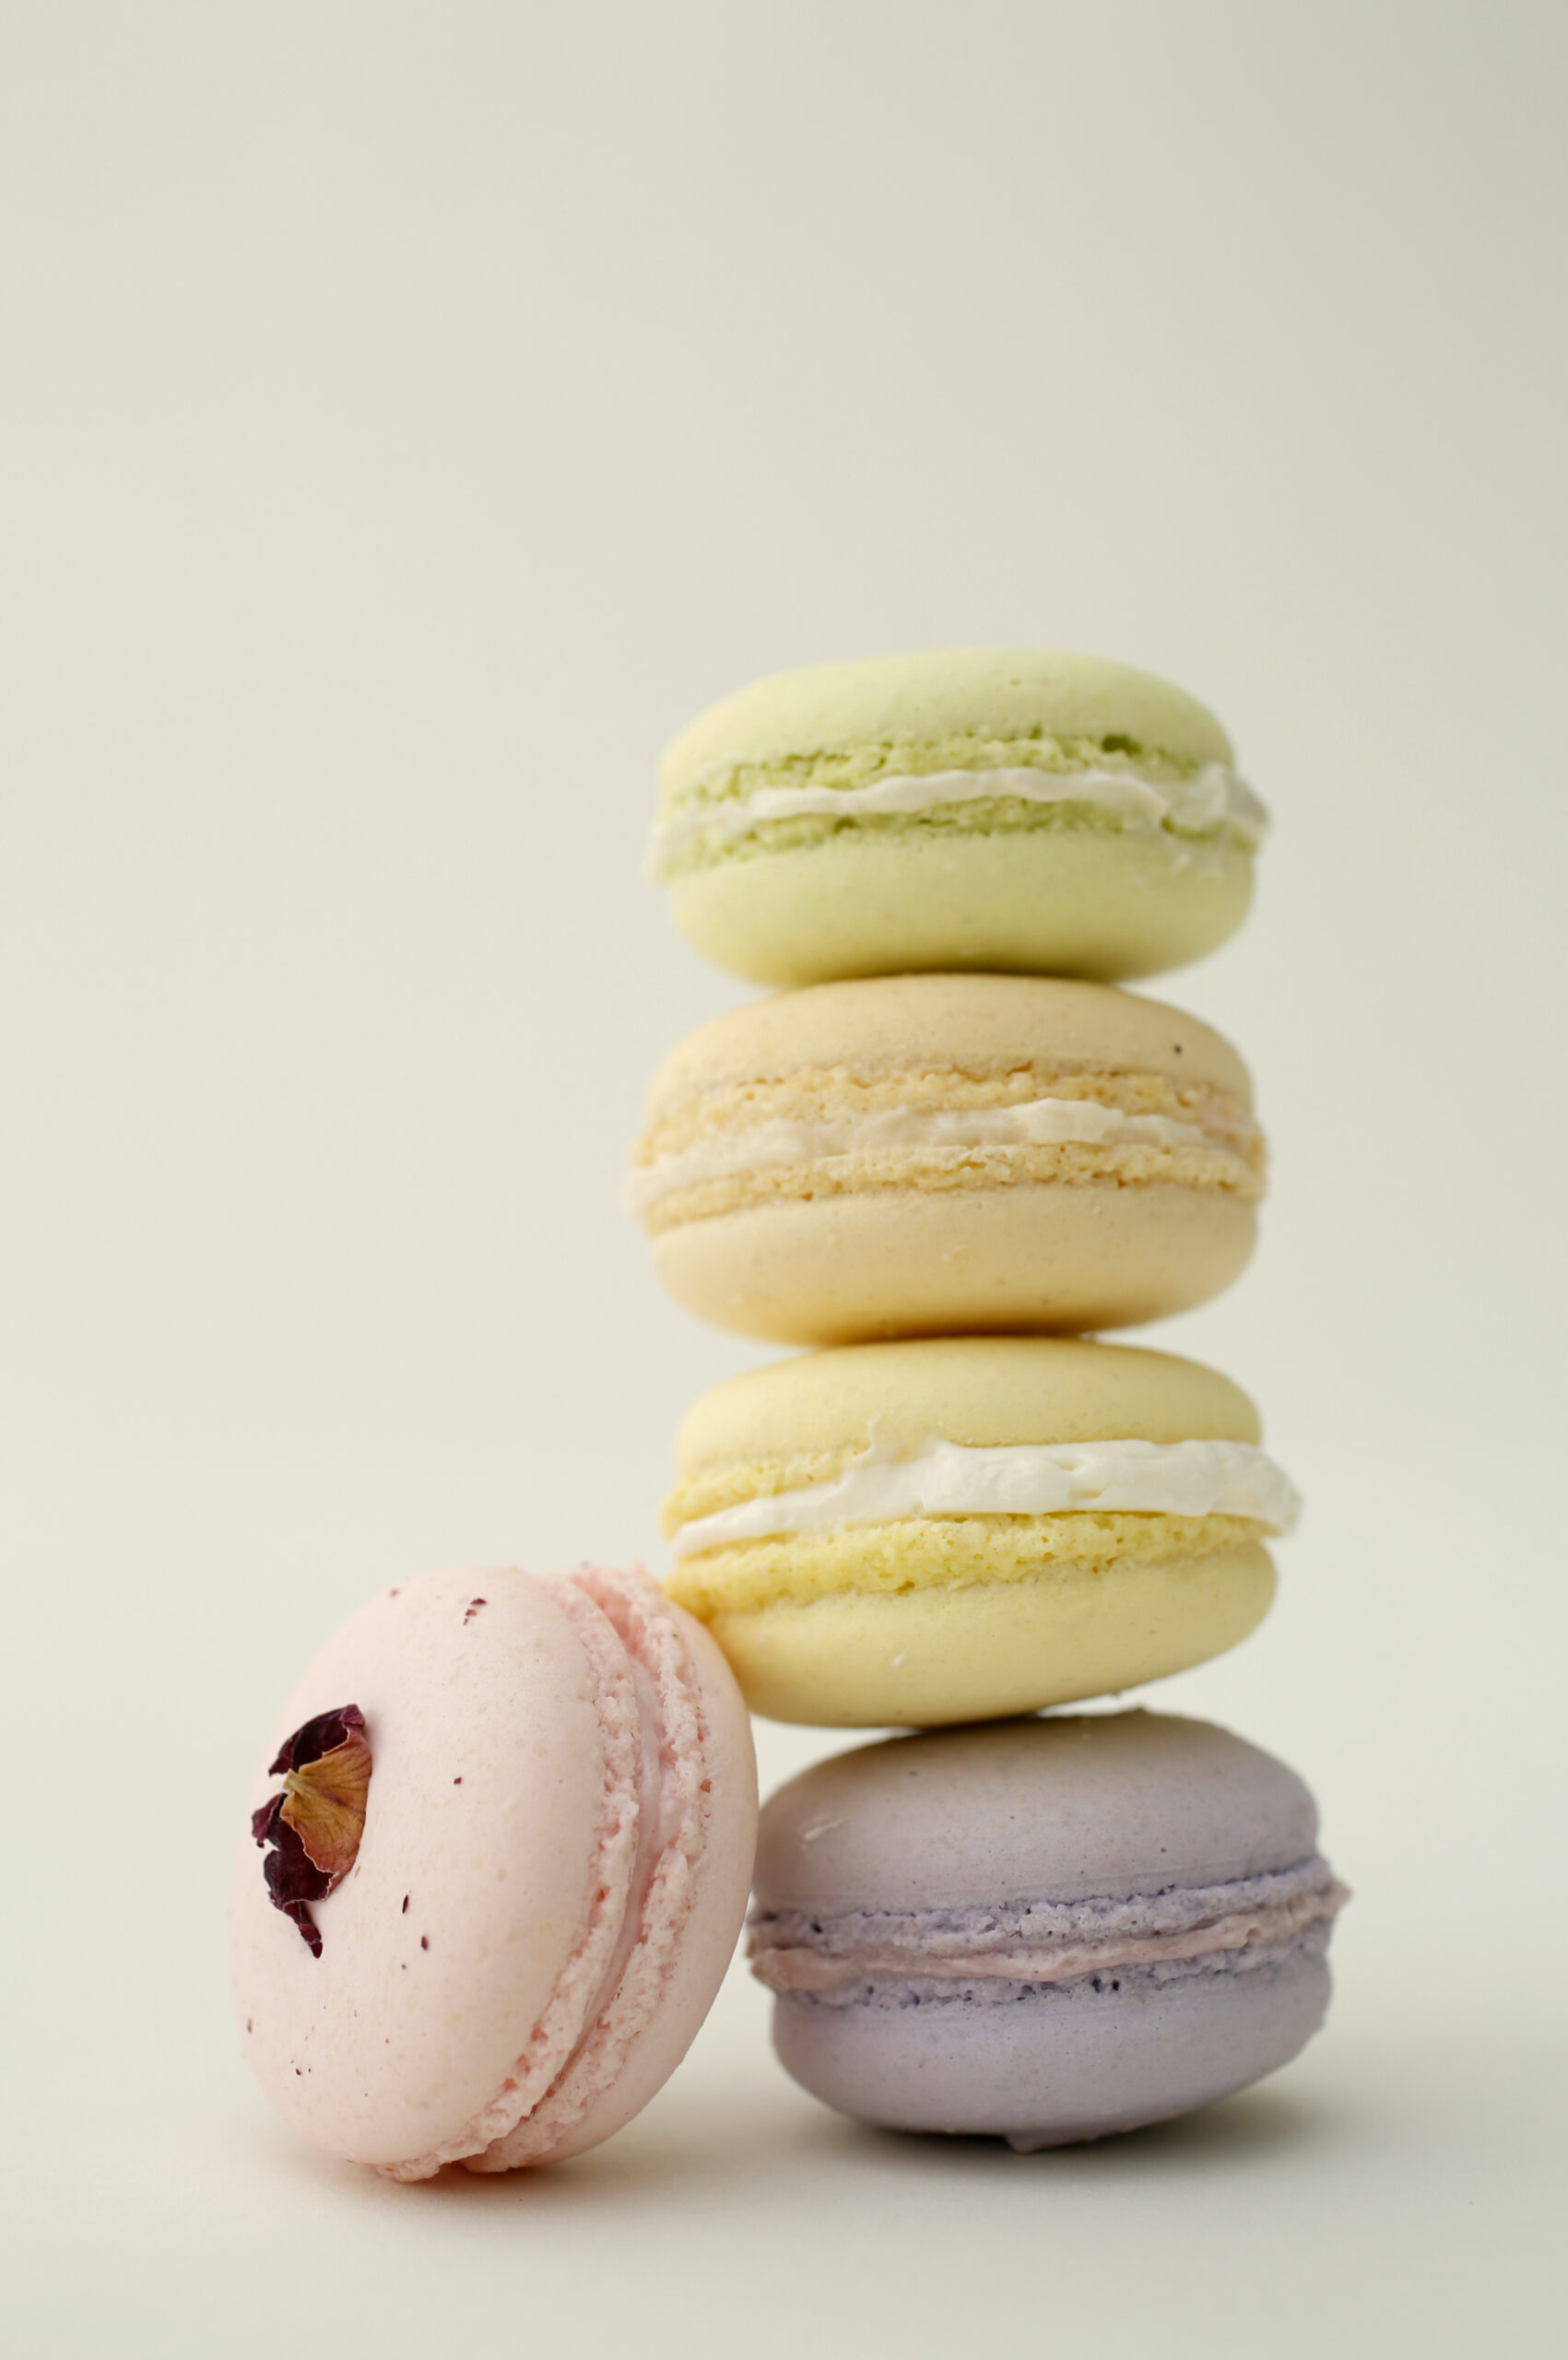 Macaron flavors by Patisserie Angelica include rose, pistachio, salted caramel, Meyer lemon, and blackberry in Sebastopol, on Thursday, May 1, 2014. (BETH SCHLANKER/ The Press Democrat)